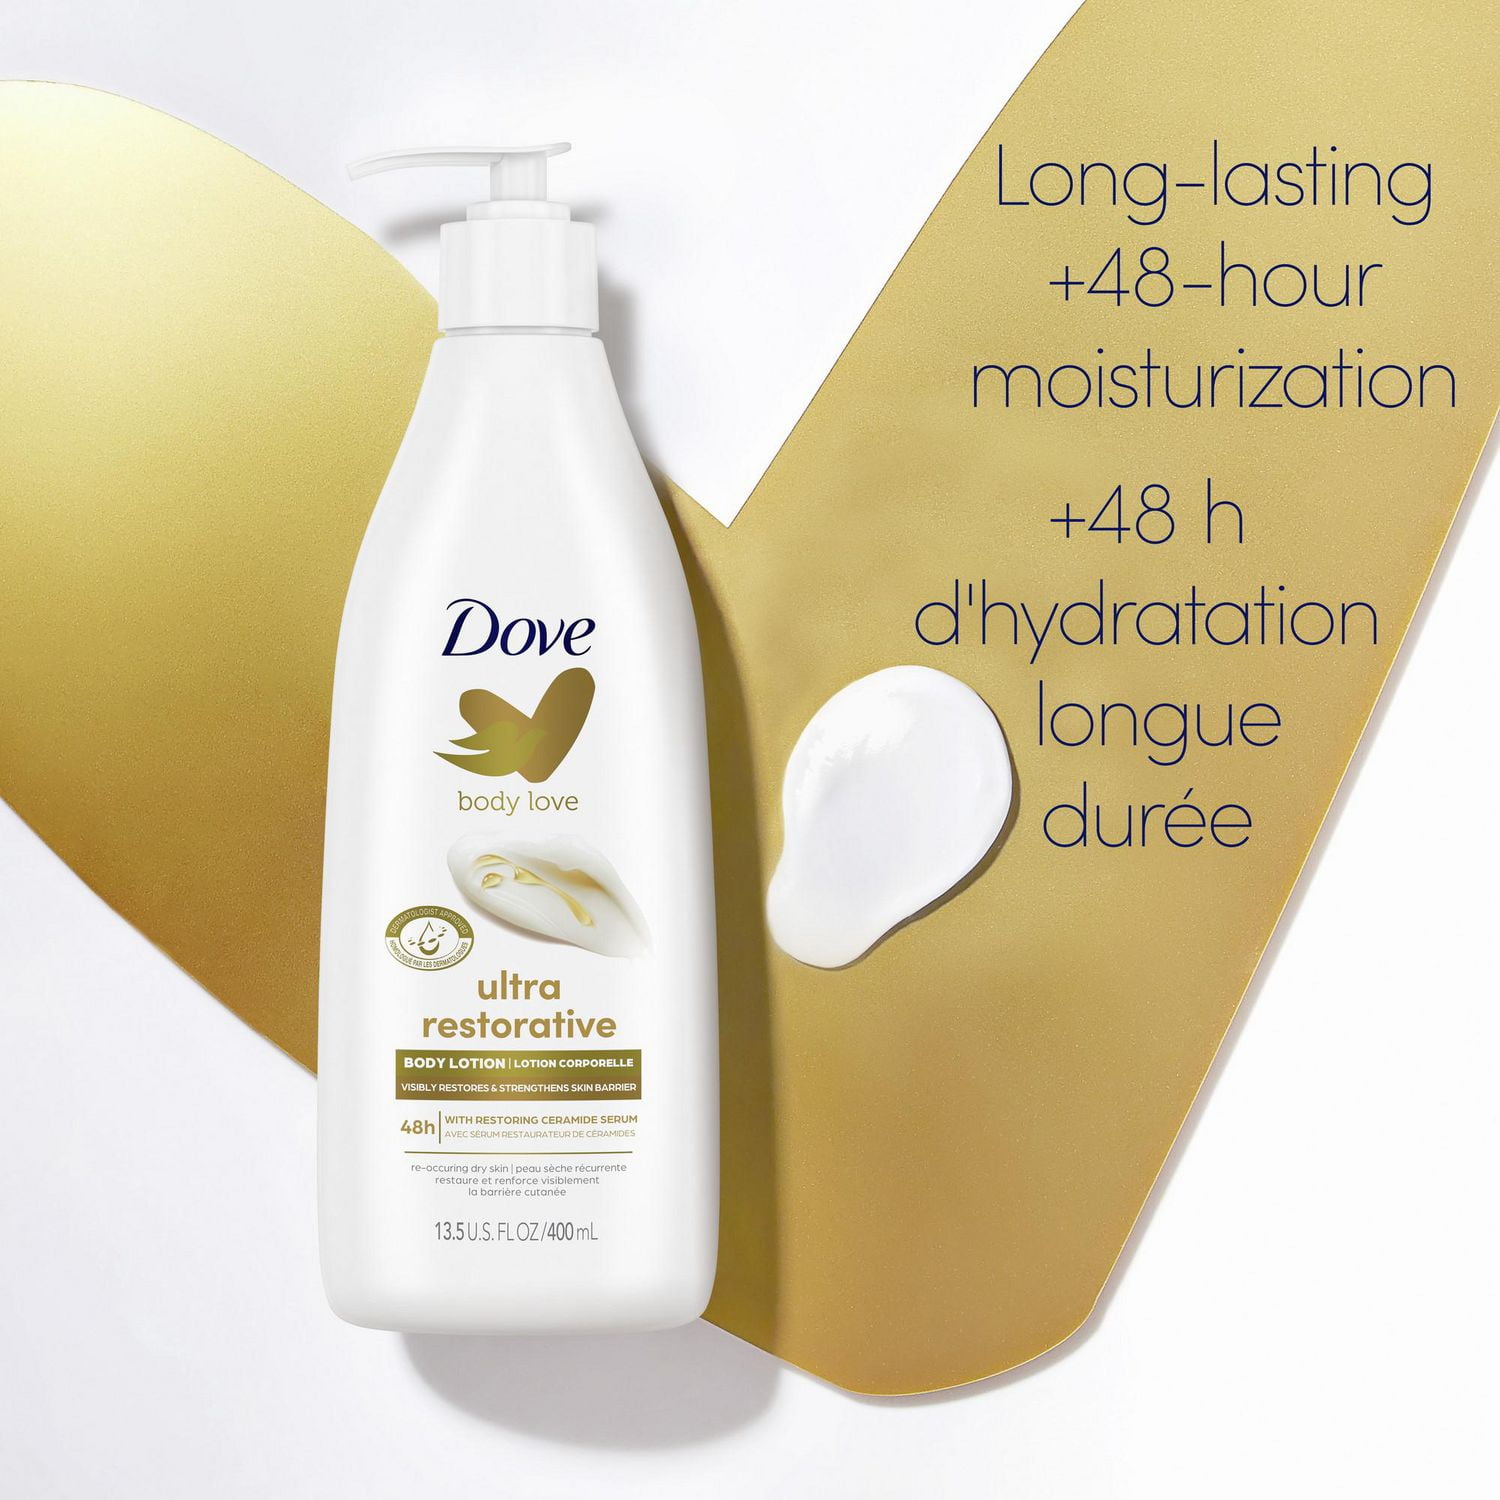 Olay Firming & Hydrating Body Lotion with Collagen, 502 mL Pump